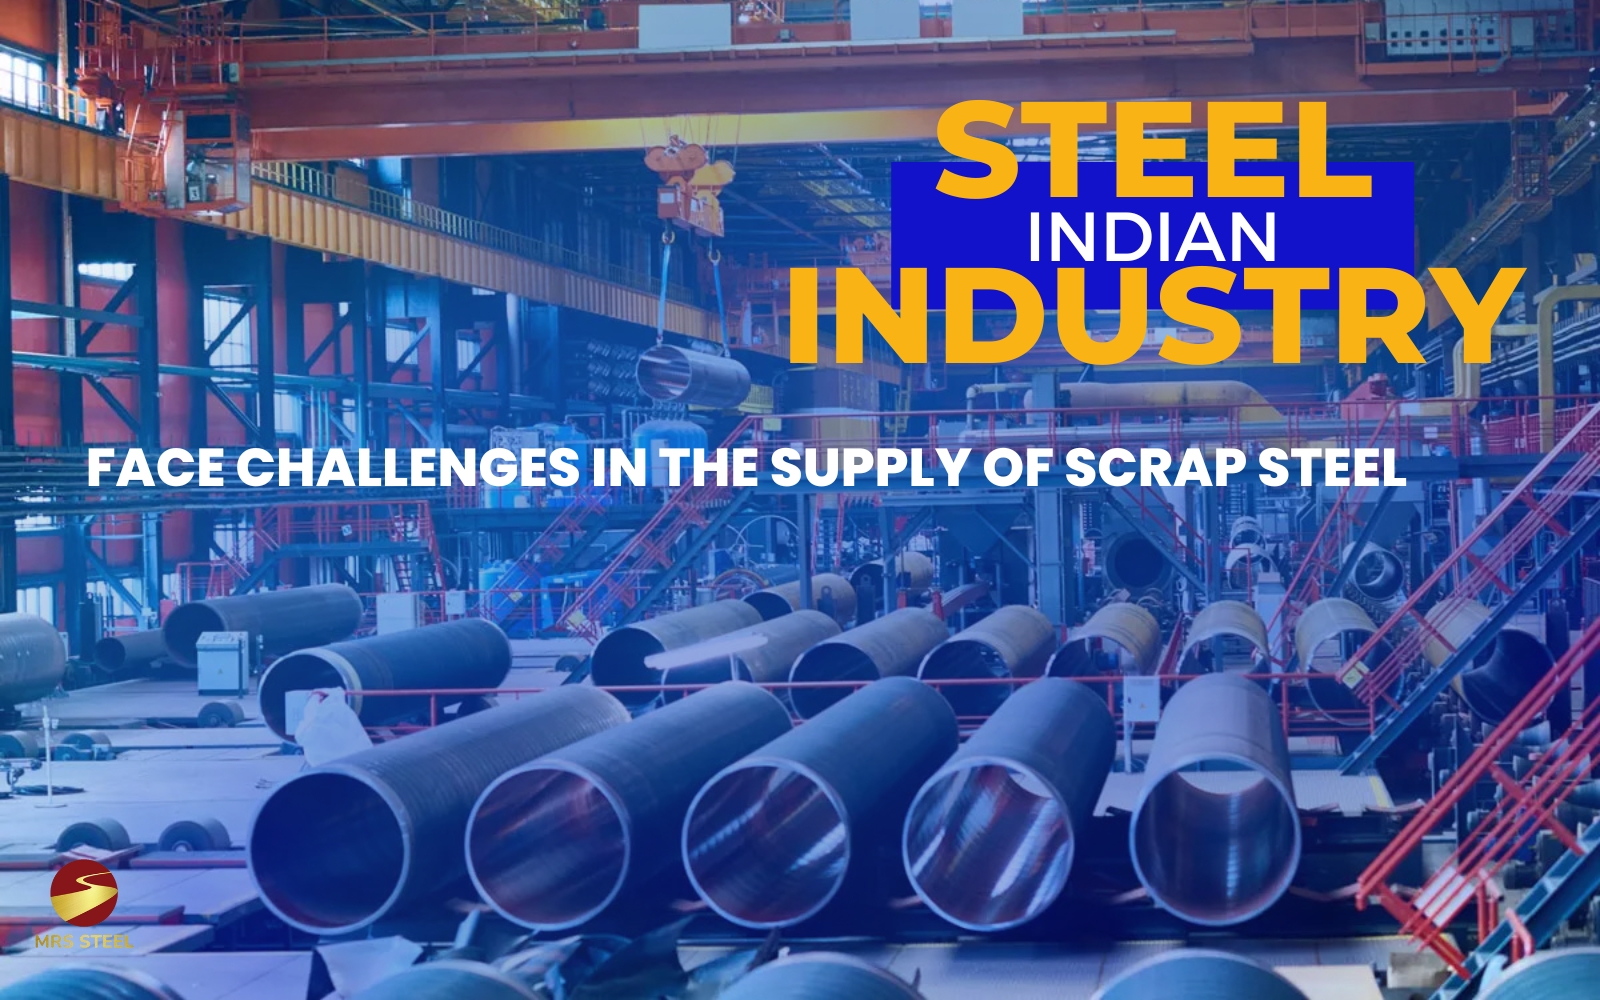 The Indian steel industry faces challenges in the supply of scrap steel